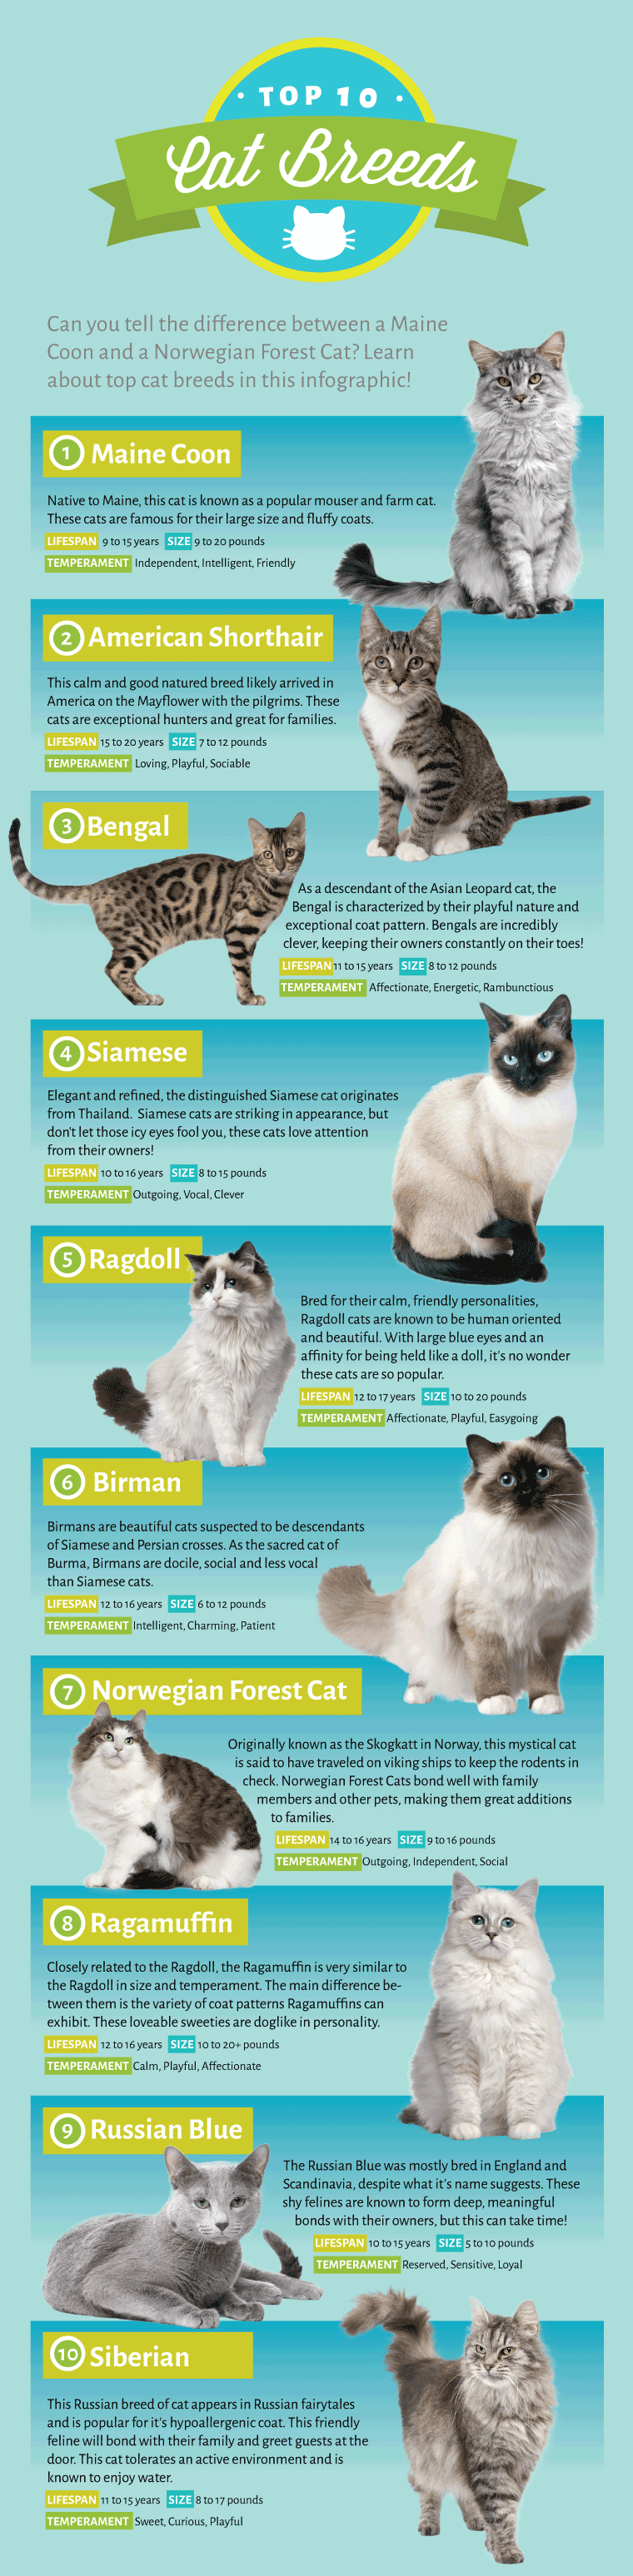 The top 10 cat breeds as voted by EntirelyPets fans and interesting facts about them - infographic.